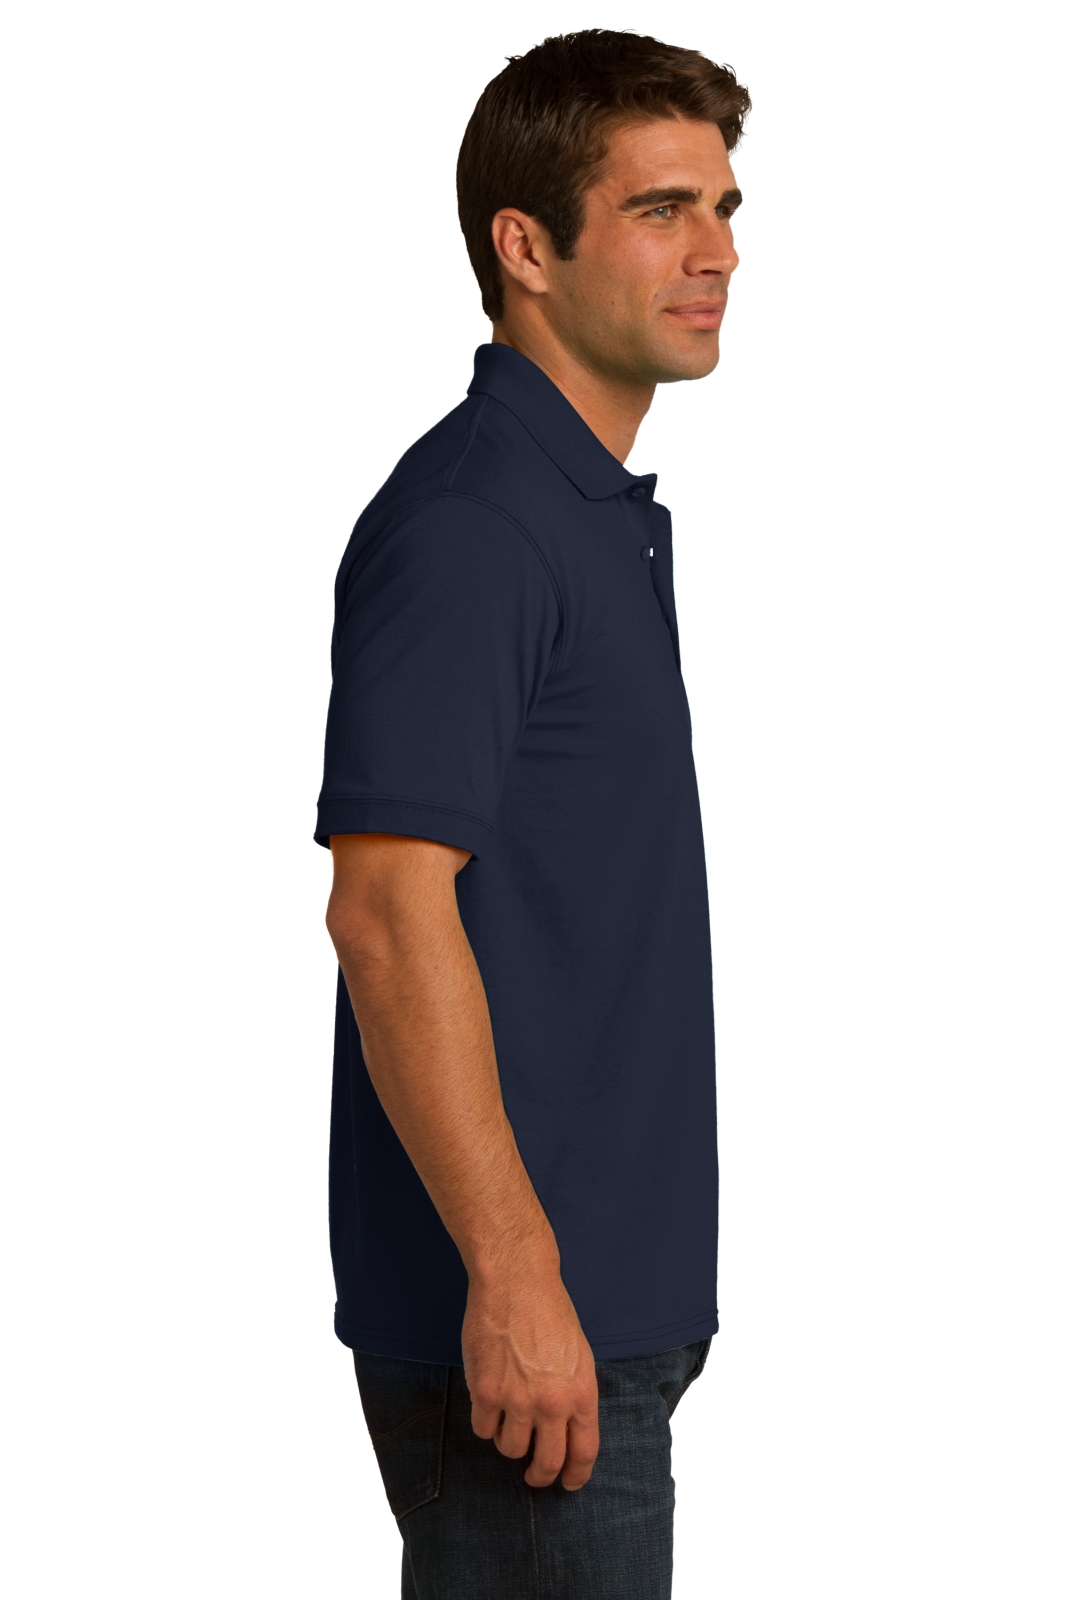 Port & Company Tall Core Blend Jersey Knit Polo - image 2 of 3